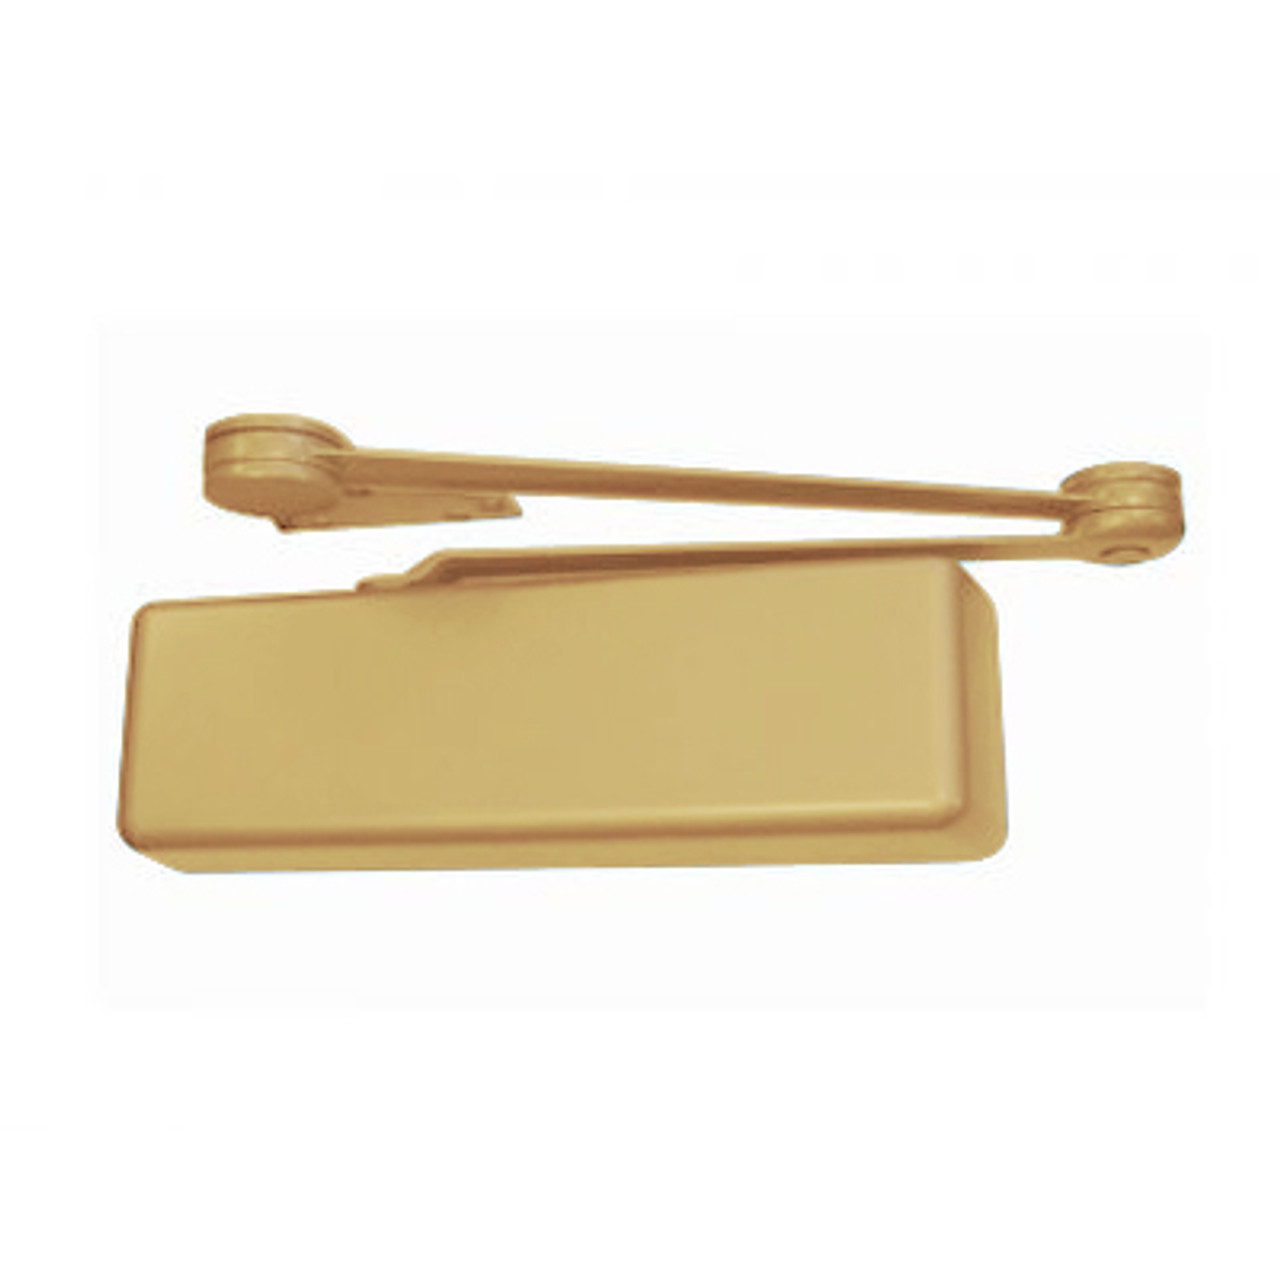 4113T-H-BUMPER-LH-US4 LCN Door Closer Hold Open Track with Bumper in Satin Brass Finish